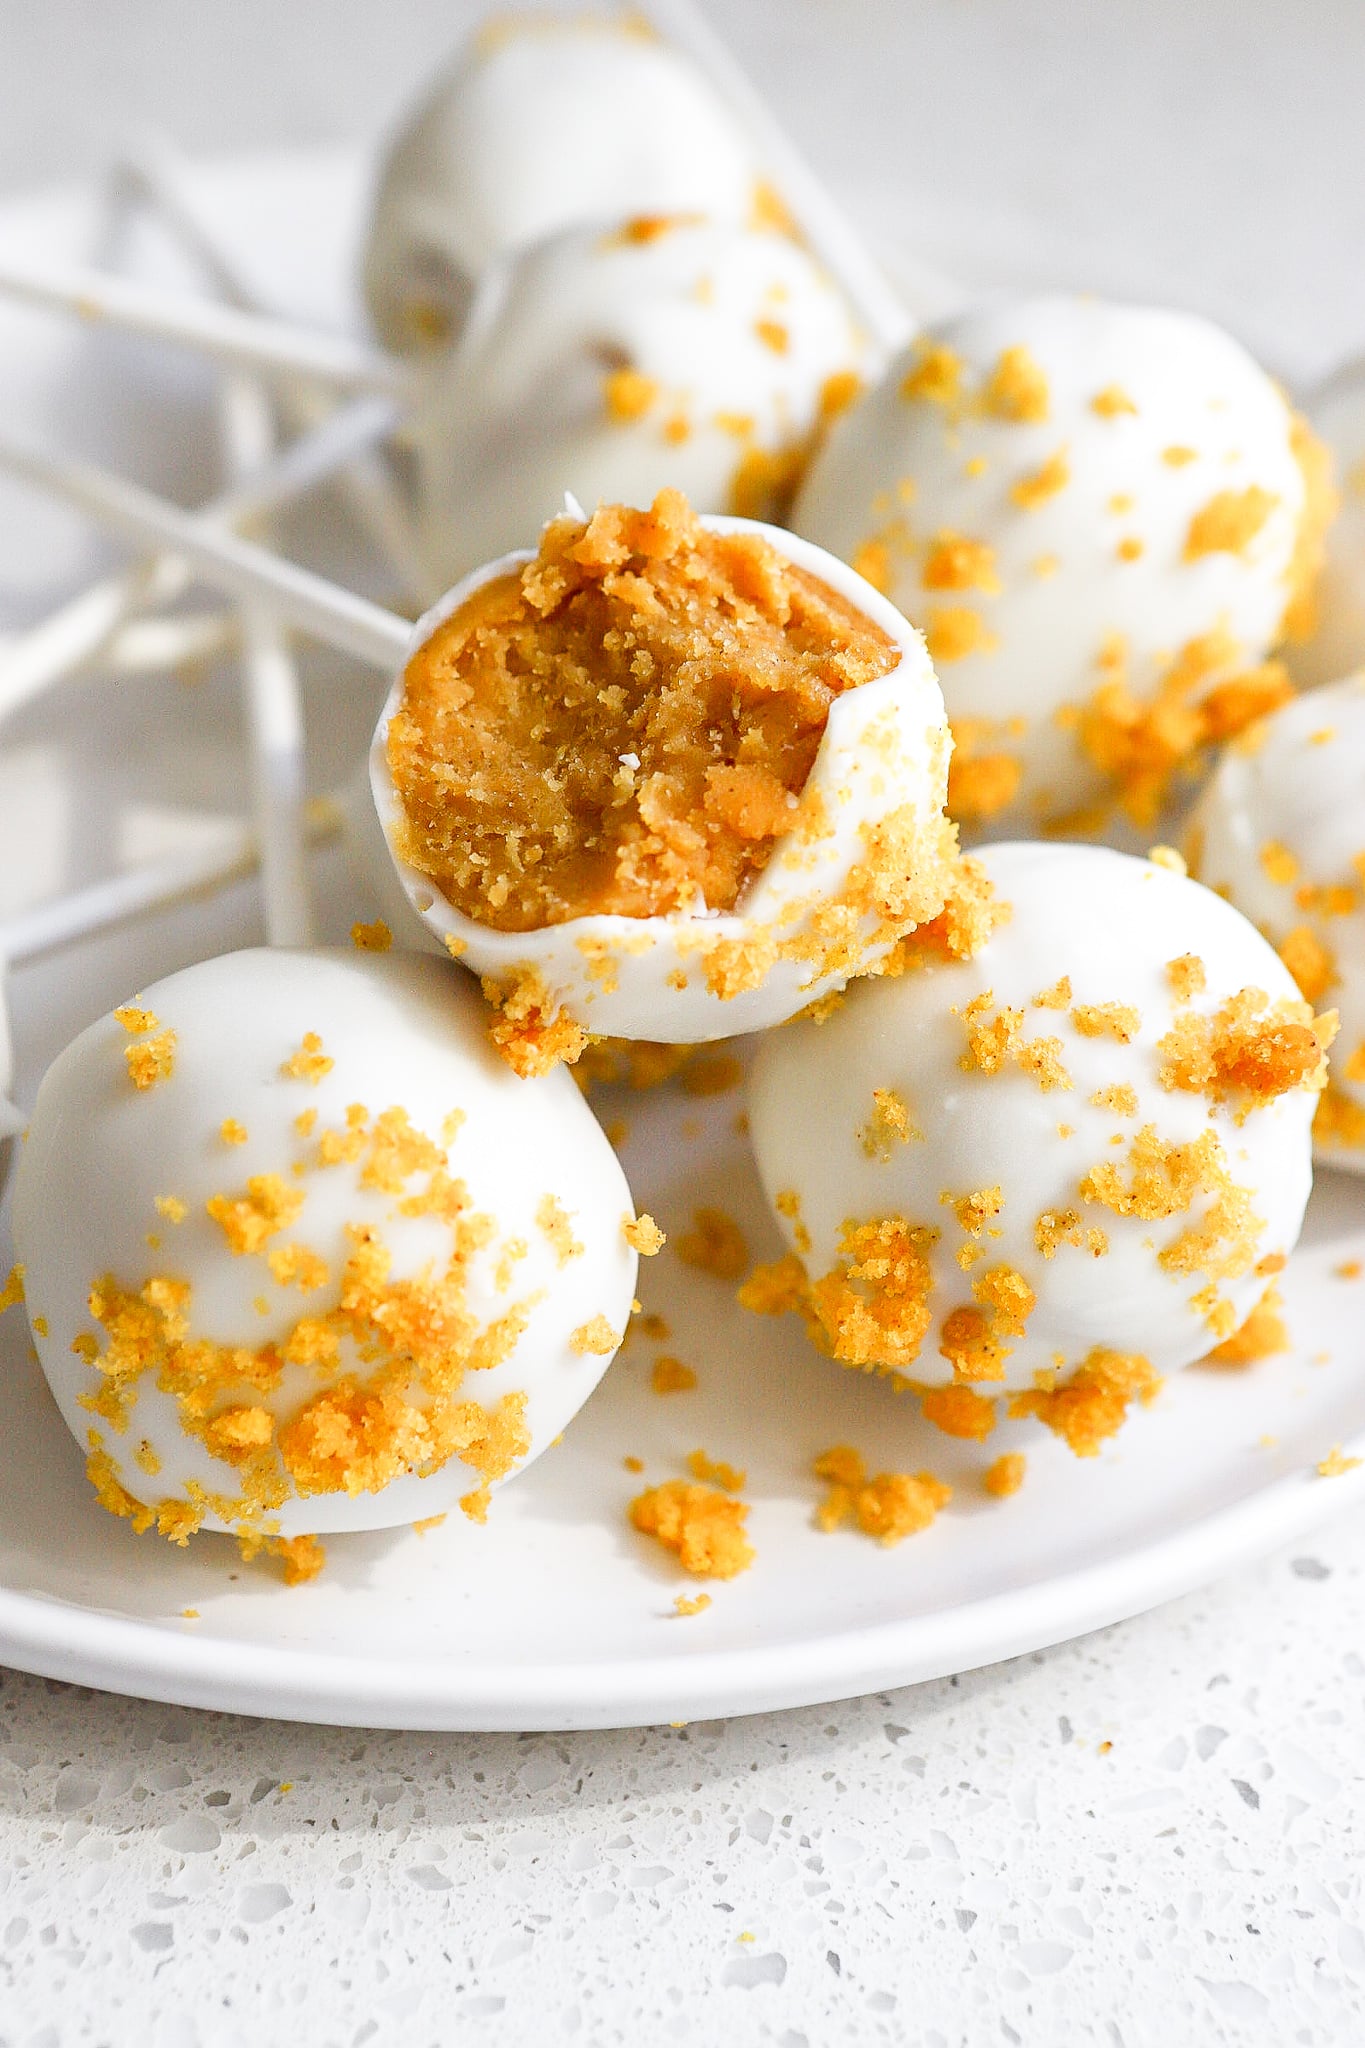 These Sweet Little Pumpkin Cakes Are the Ultimate Fall Dessert